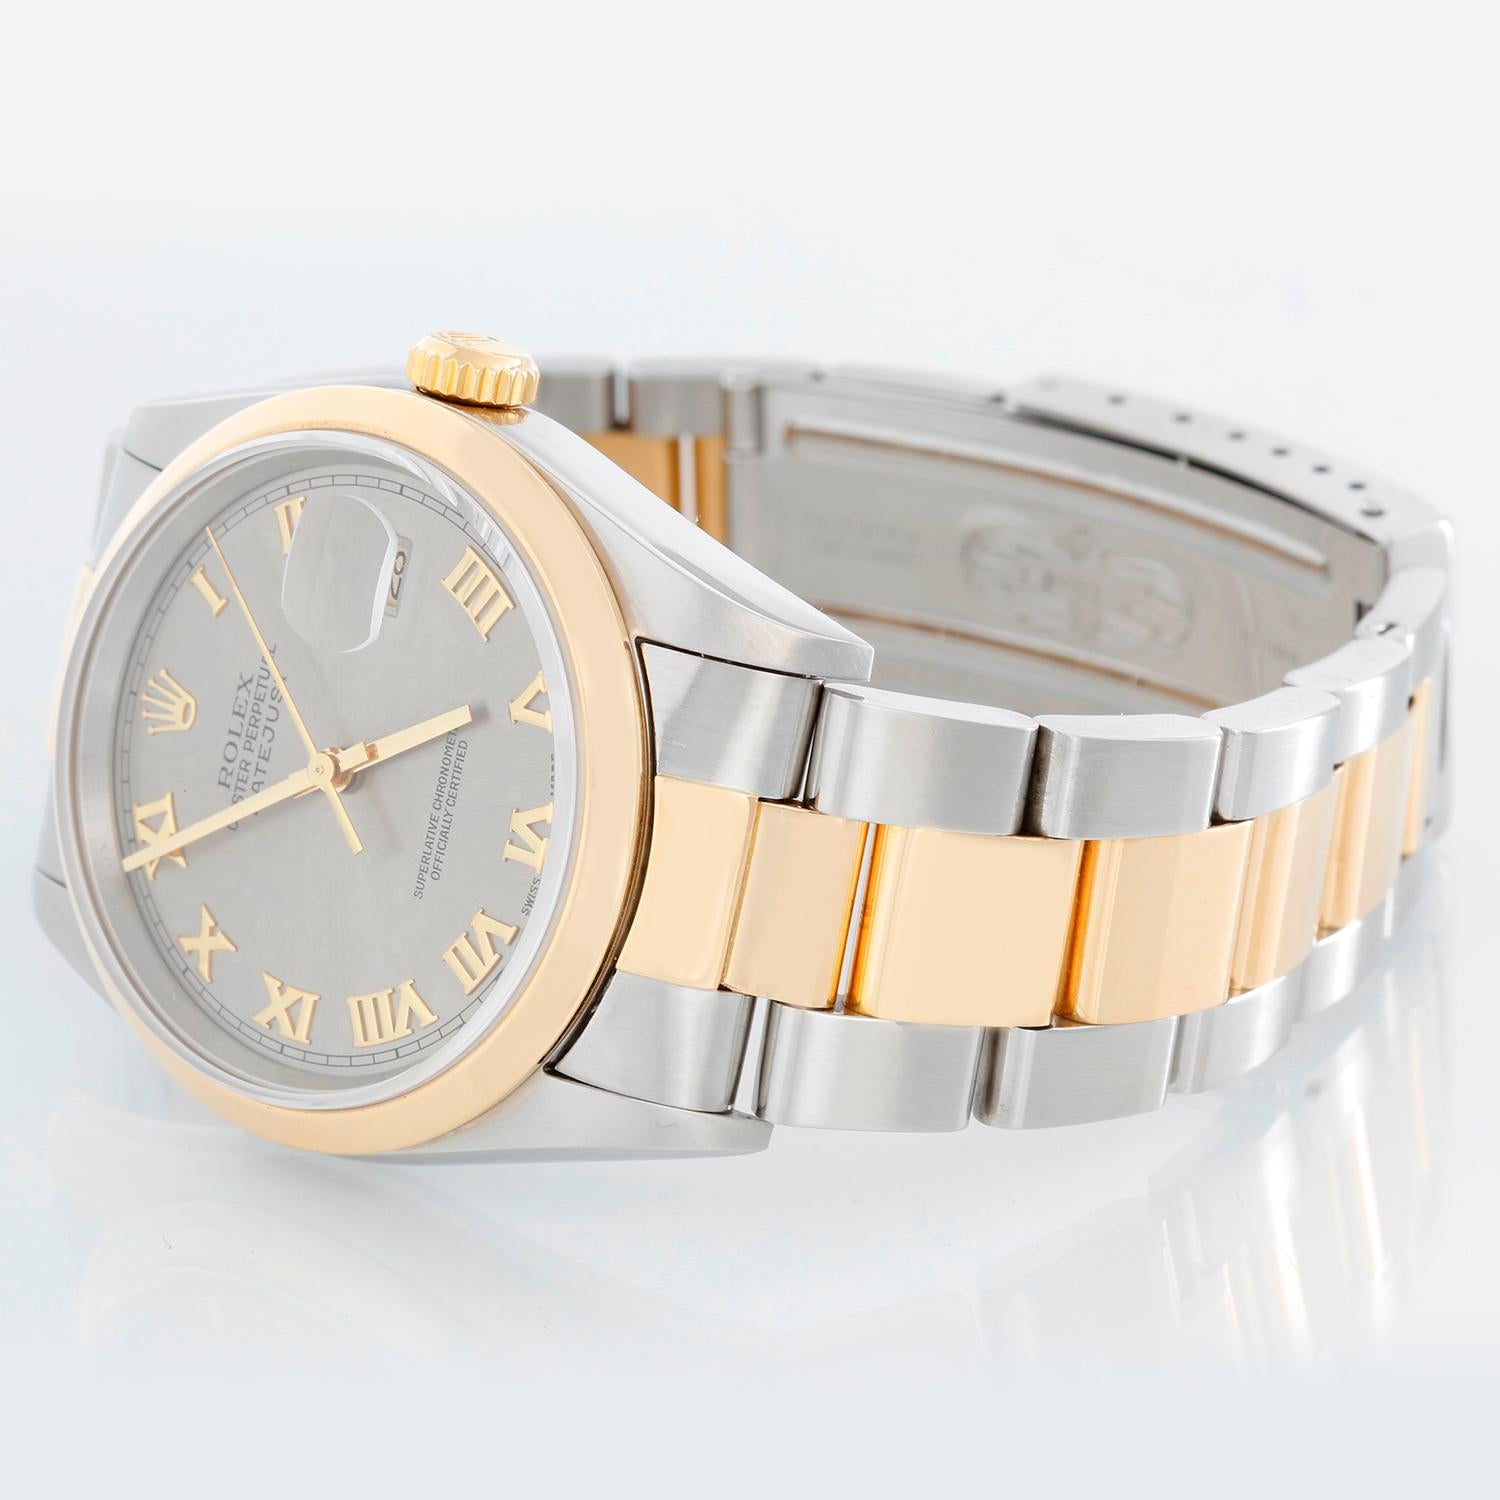 Rolex Datejust Men's 2-Tone Steel & Gold Watch 16203 - Automatic winding, 31 jewels, Quickset, sapphire crystal. Stainless steel with 18k yellow gold smooth bezel (36mm diameter). Rhodium dial with roman numerals . Rolex Two- tone Oyster bracelet.